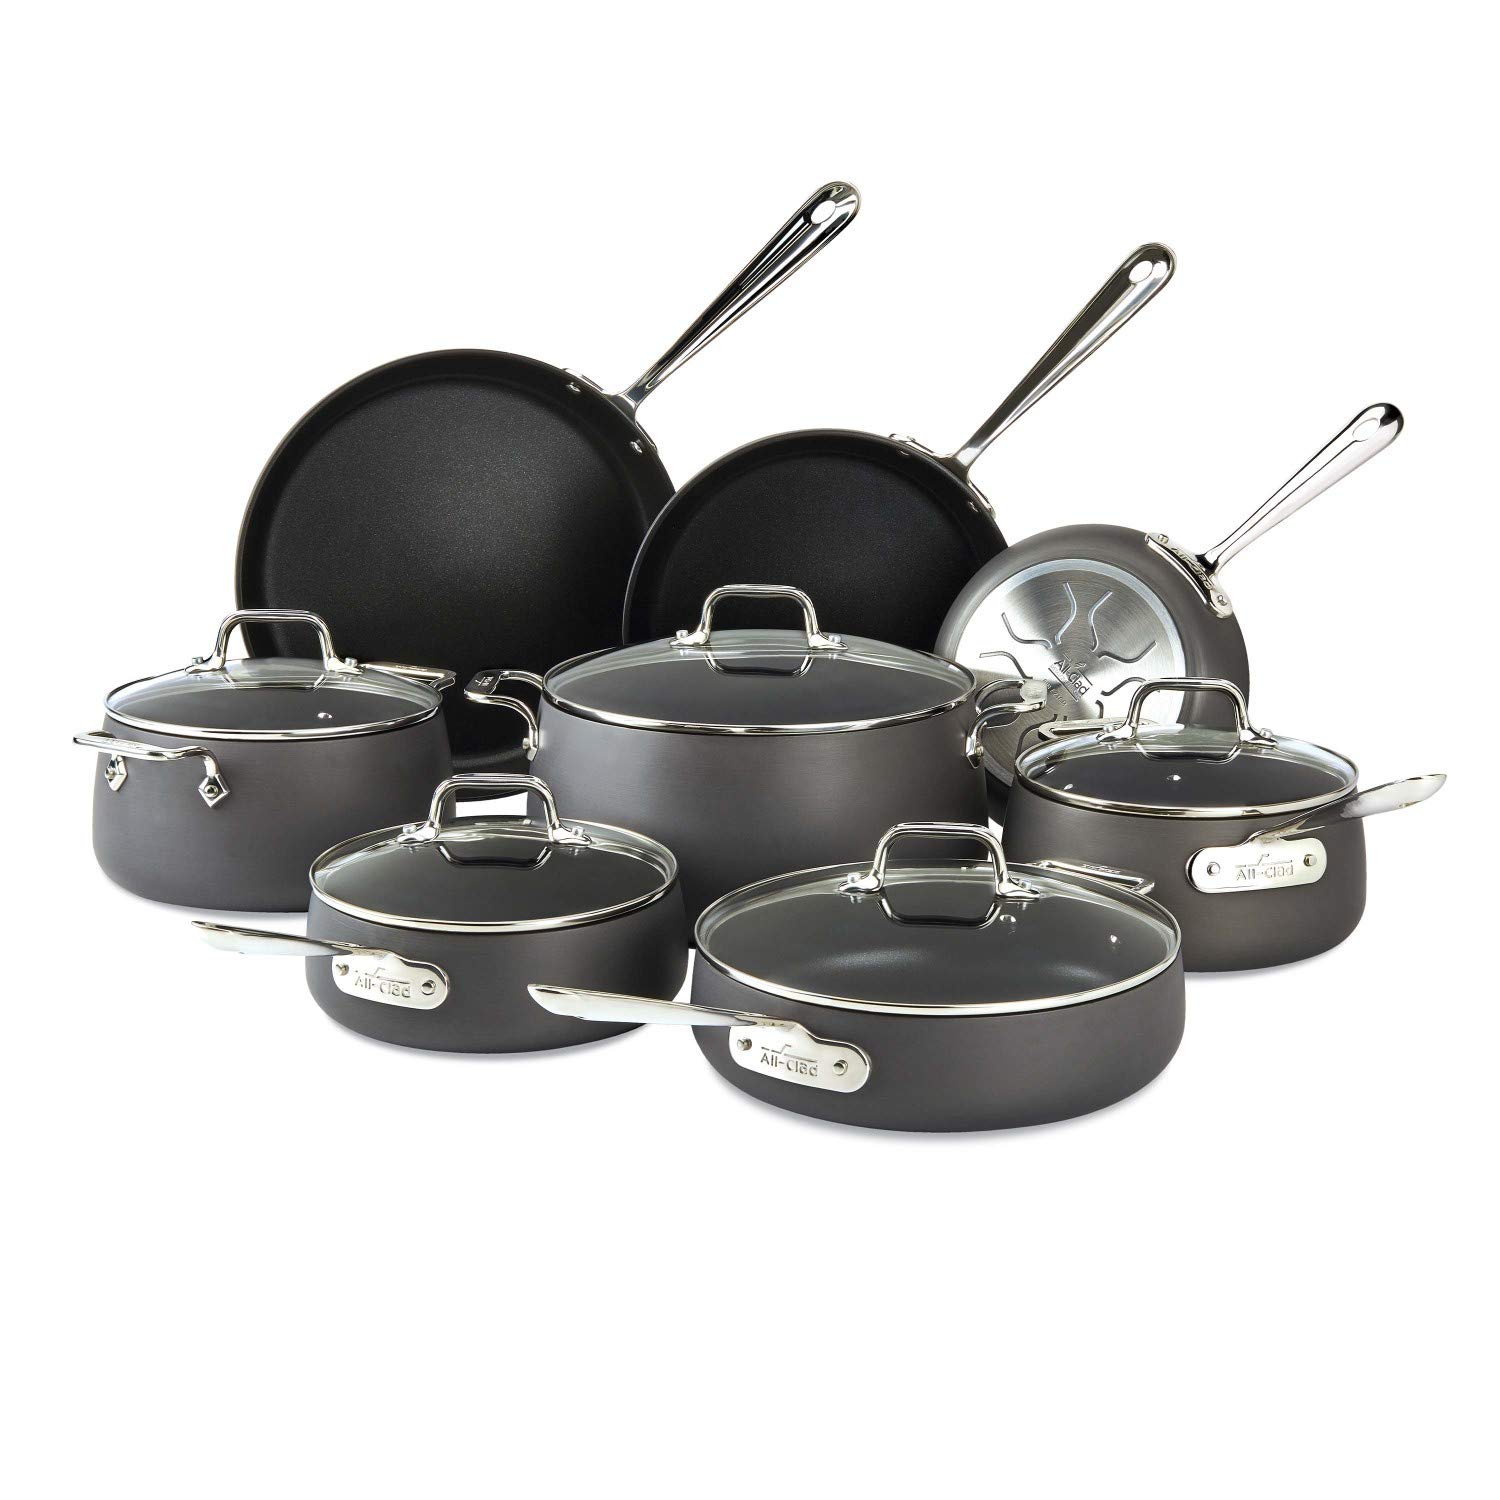 All-Clad HA1 Hard Anodized Nonstick Cookware Set 13 Piece